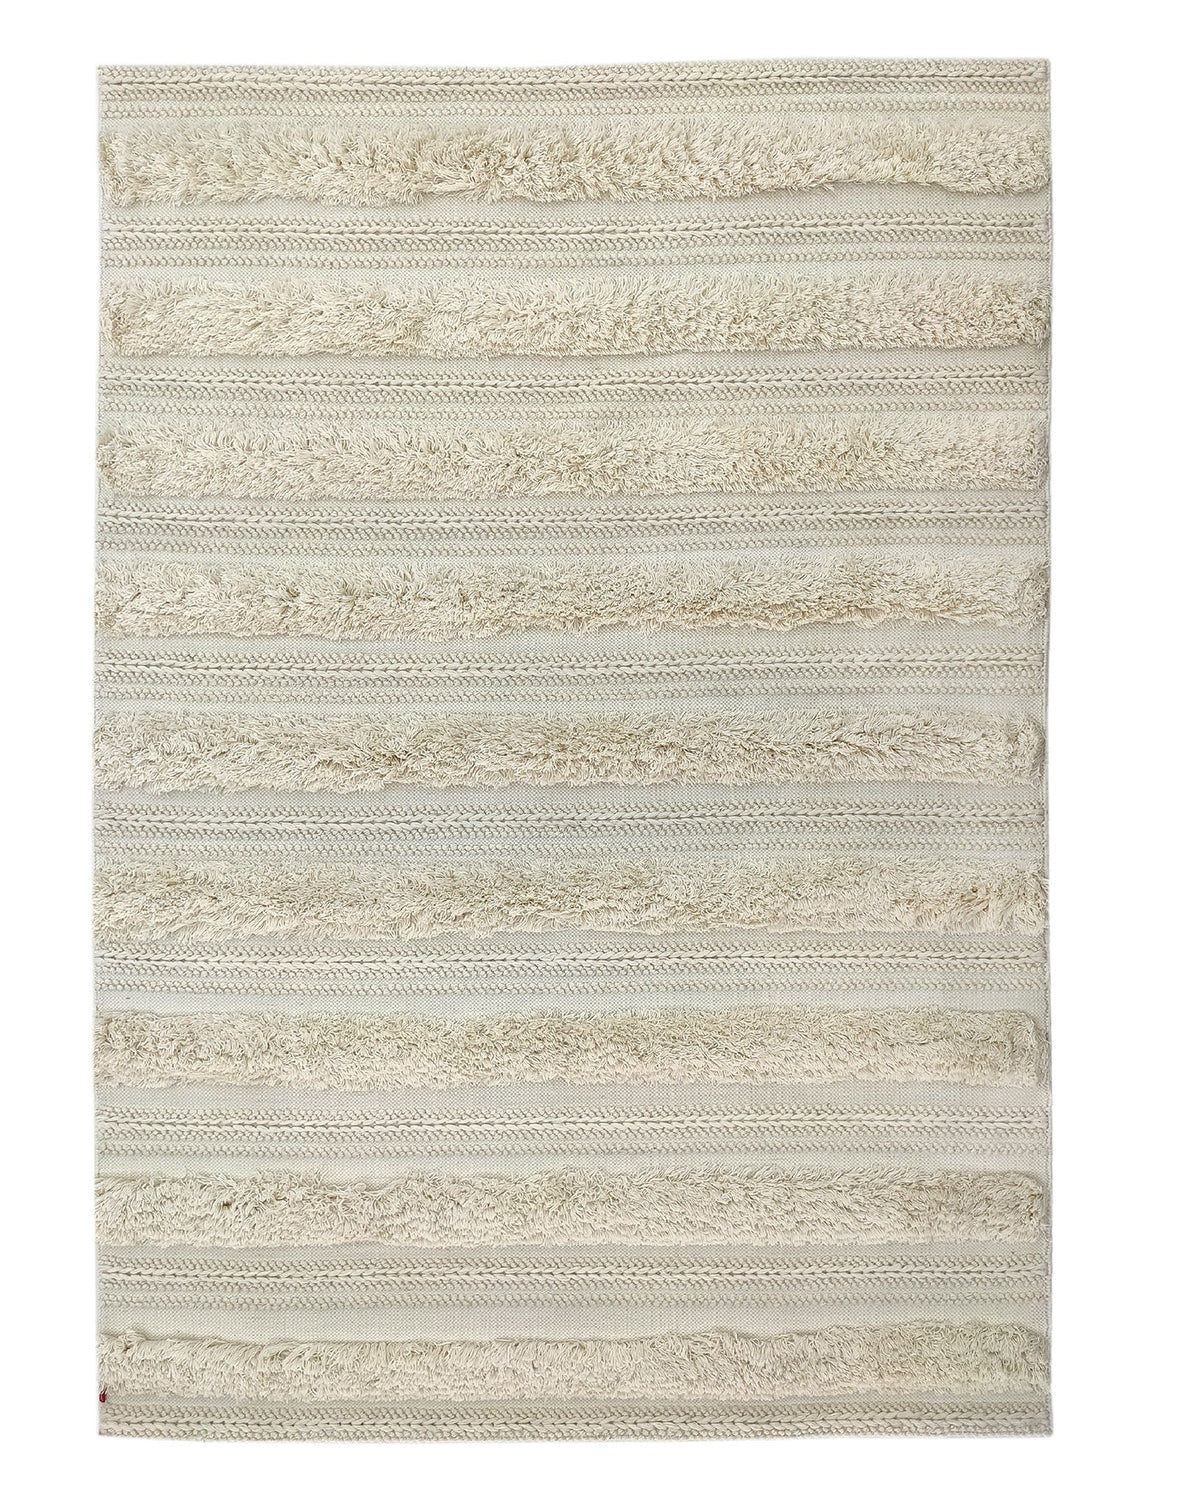 Hand Made Natural White Woven Decor Floor Rug (2 Sizes)